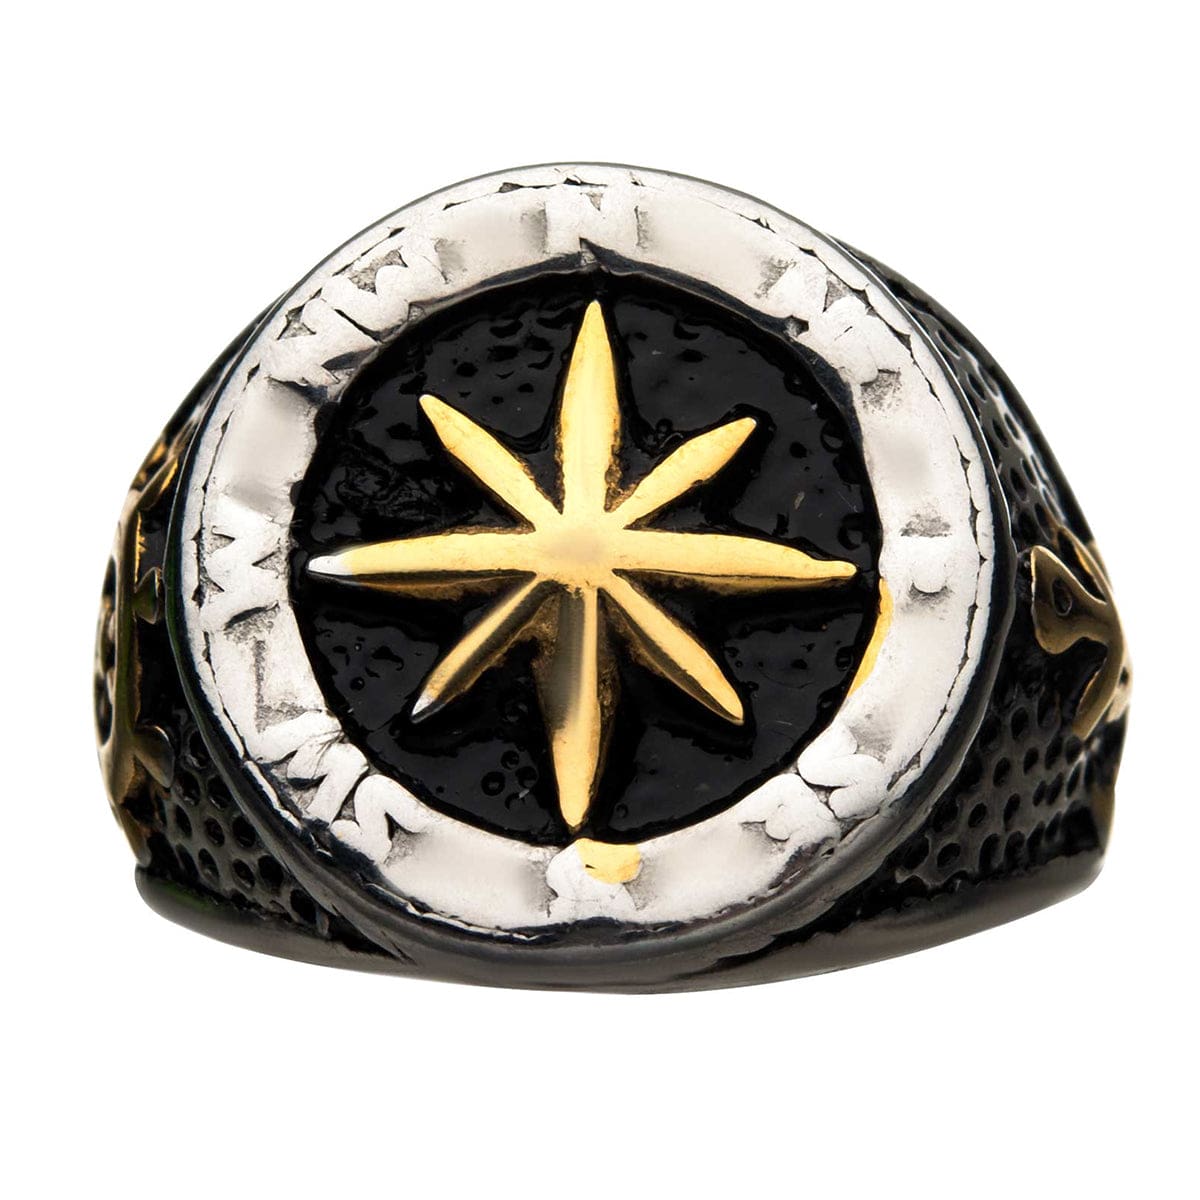 INOX JEWELRY Rings Golden Tone, Black and Antiqued Silver Tone Stainless Steel Vintage Anchor with Compass Signet Ring